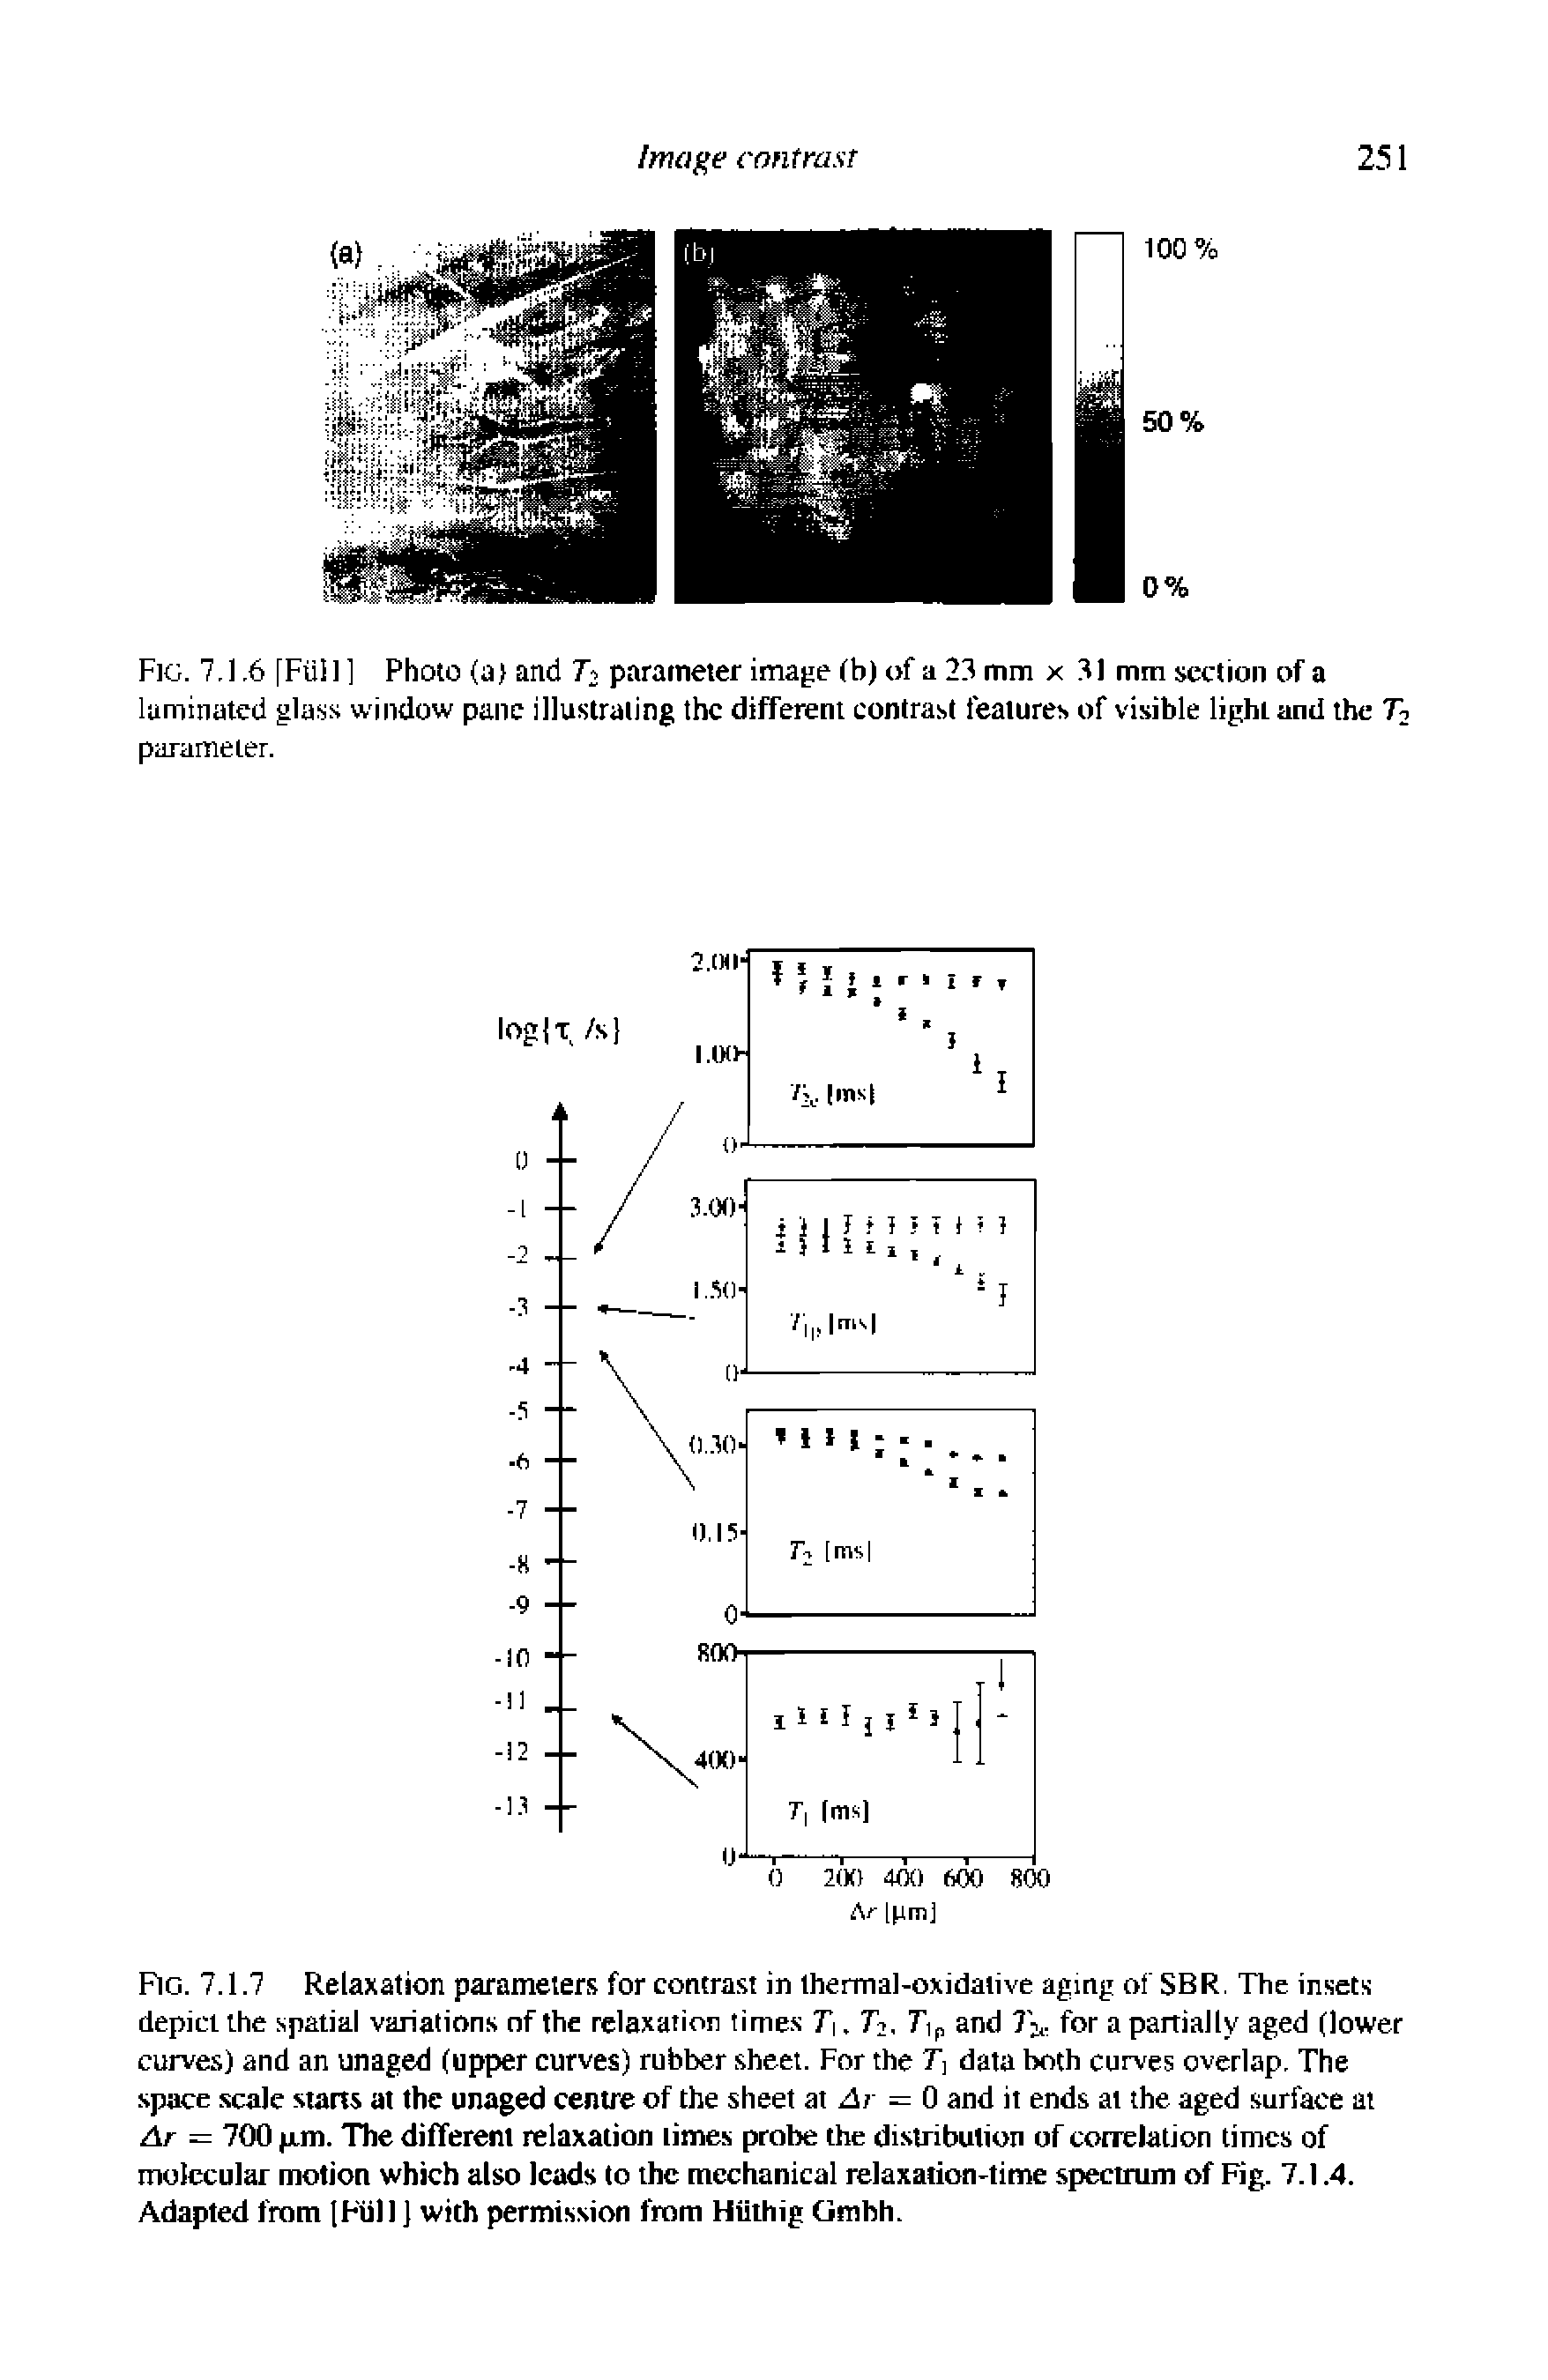 Fig. 7,1,6 [Fii l ] Photo (a) and 7 parameter image (b) of a 23 mm x 31 mm section of a laminated glass window pane illustrating the different contrast features of visible light and the T2...